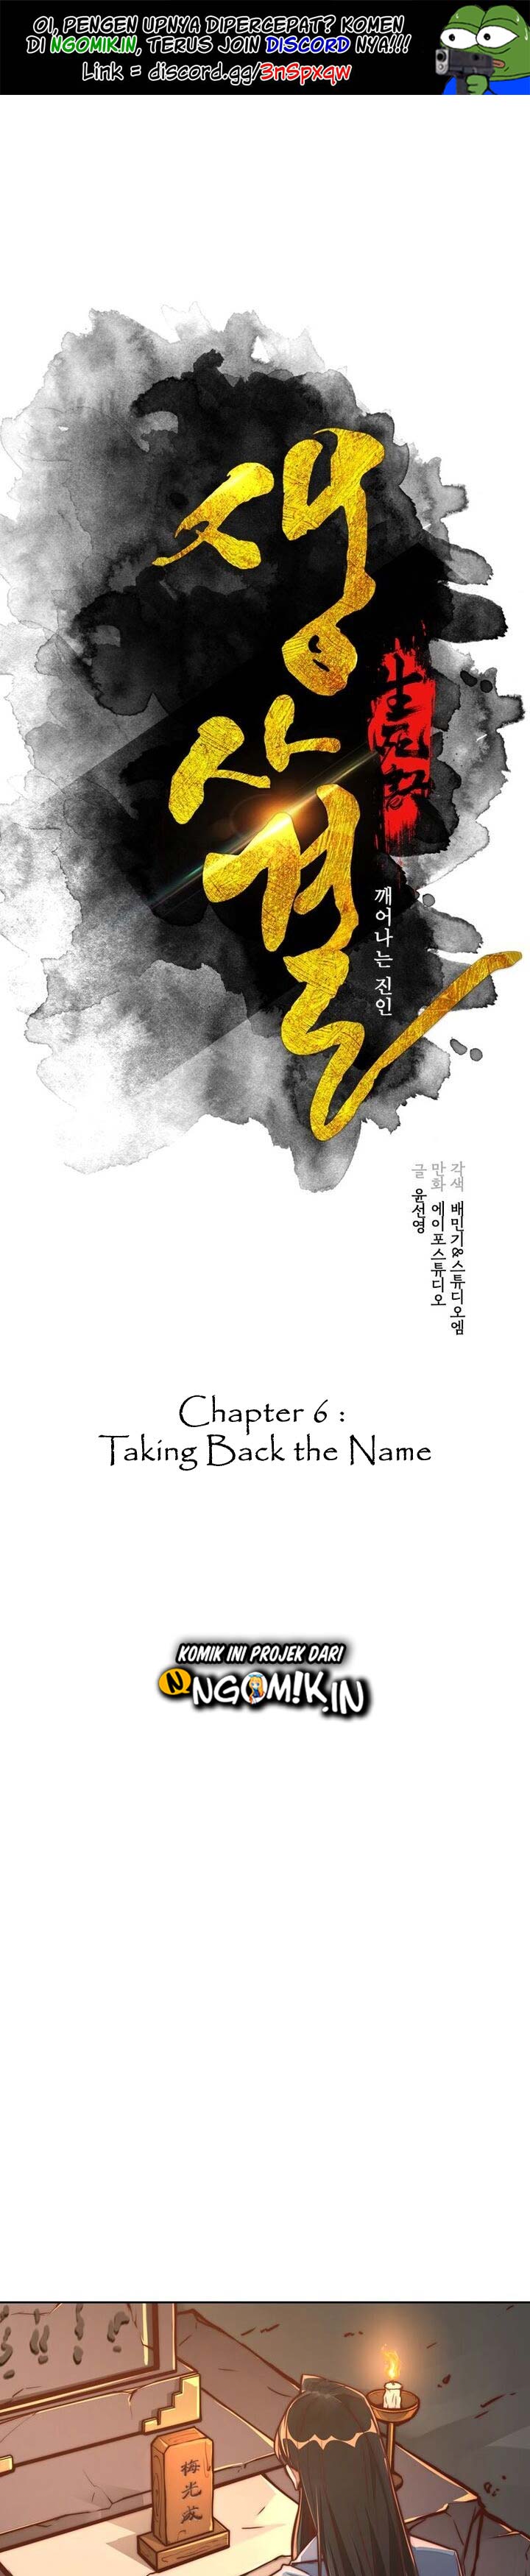 Life and Death: The Awakening Chapter 6